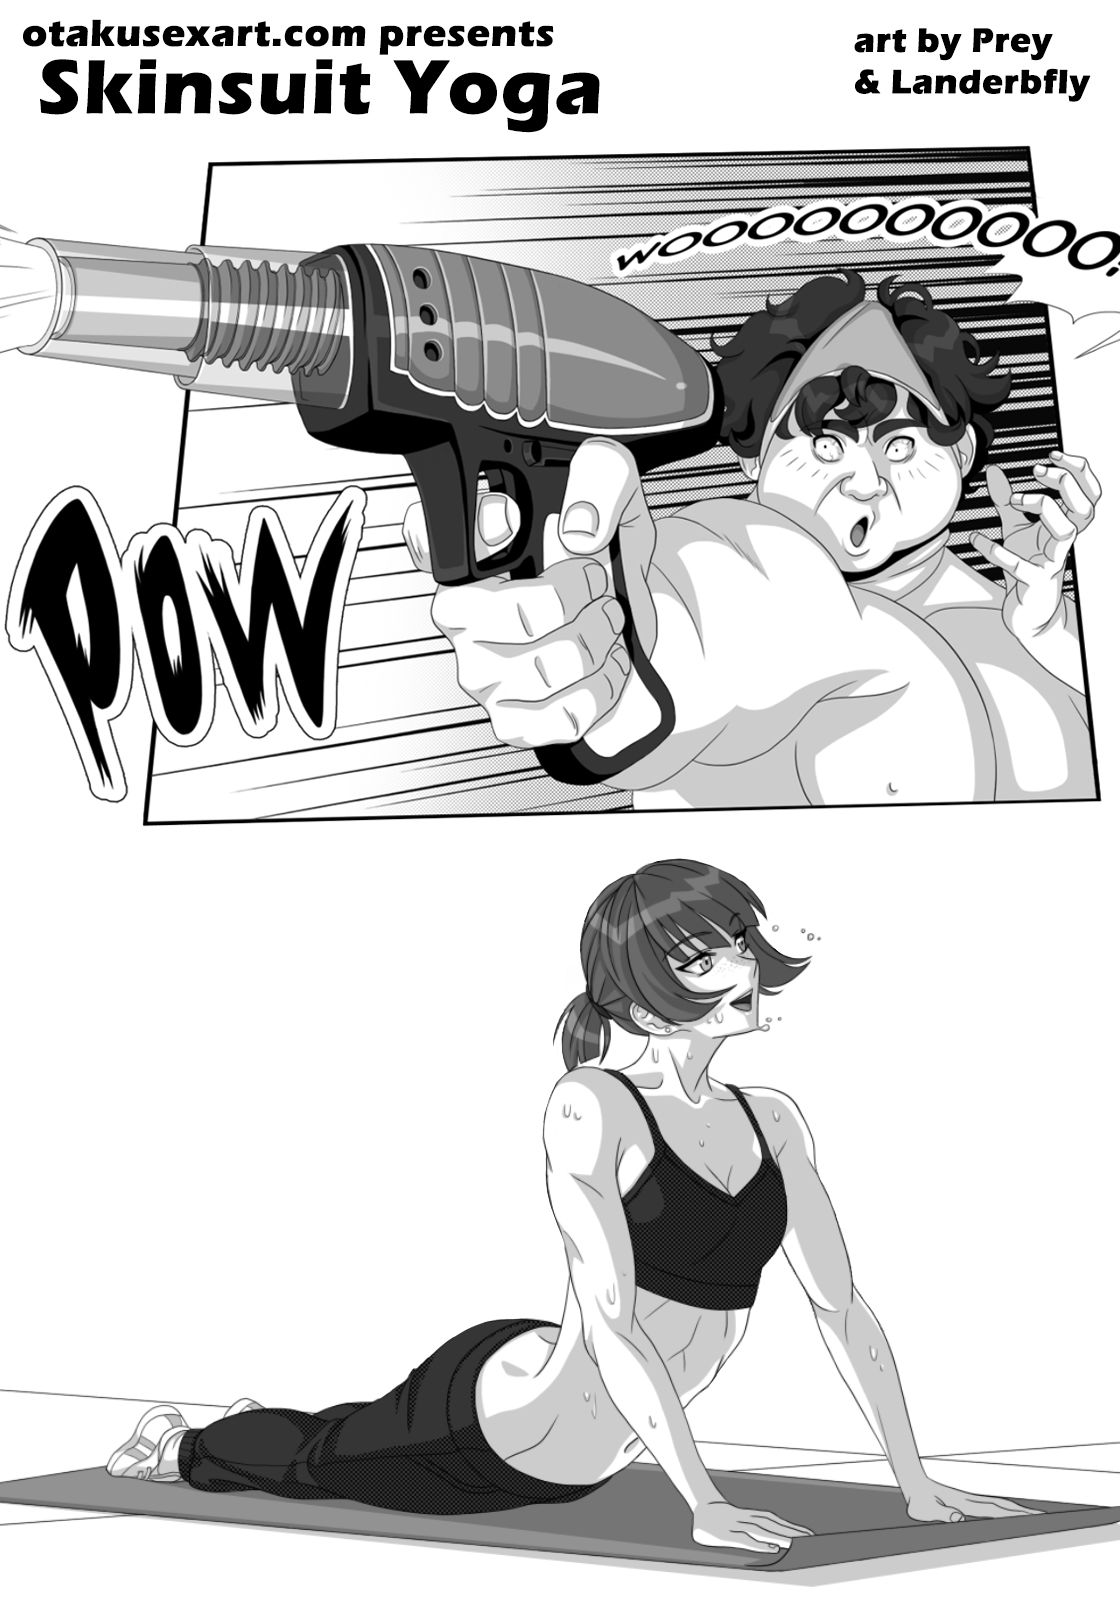 1120px x 1600px - Extreme Hentai Prostitution Comic: Skinsuit Yoga - Hentaireviews